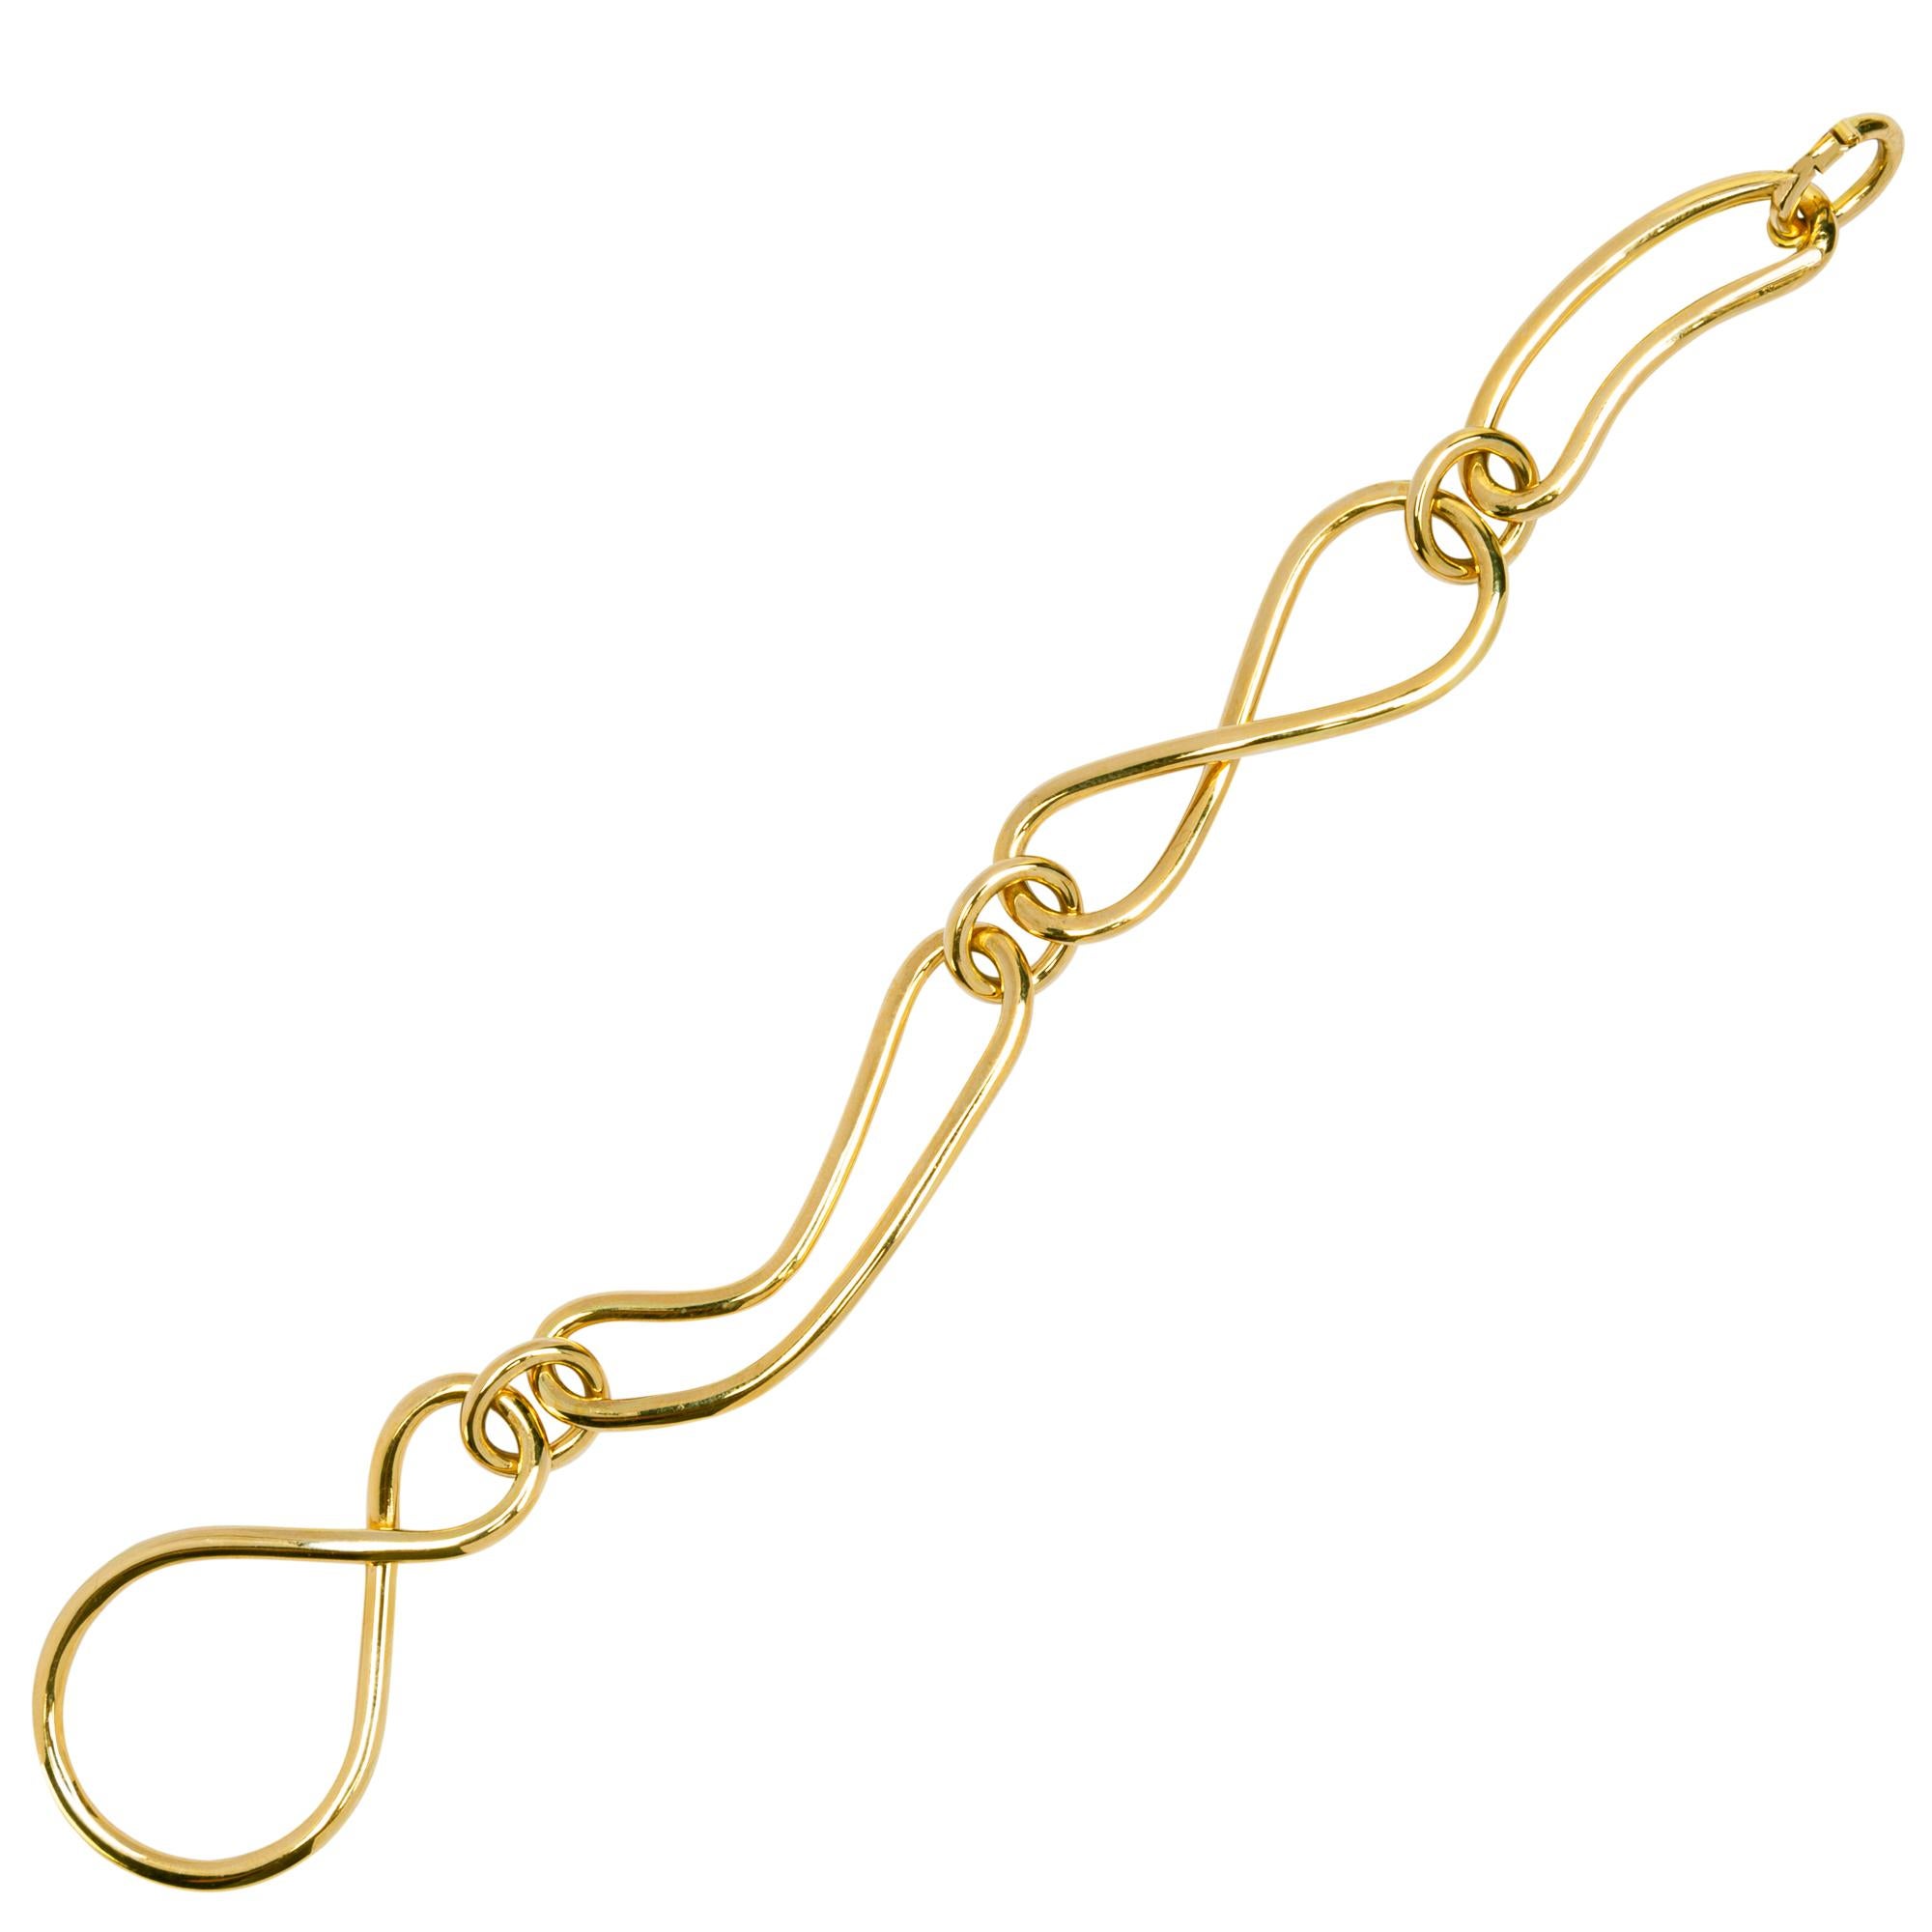 Alex Jona design collection, hand crafted in Italy, 18 karat yellow gold, link chain bracelet. Dimensions: 7.48 in. L x 1.13 in. W - 19 cm. L x 28 mm W.
Alex Jona jewels stand out, not only for their special design and for the excellent quality of